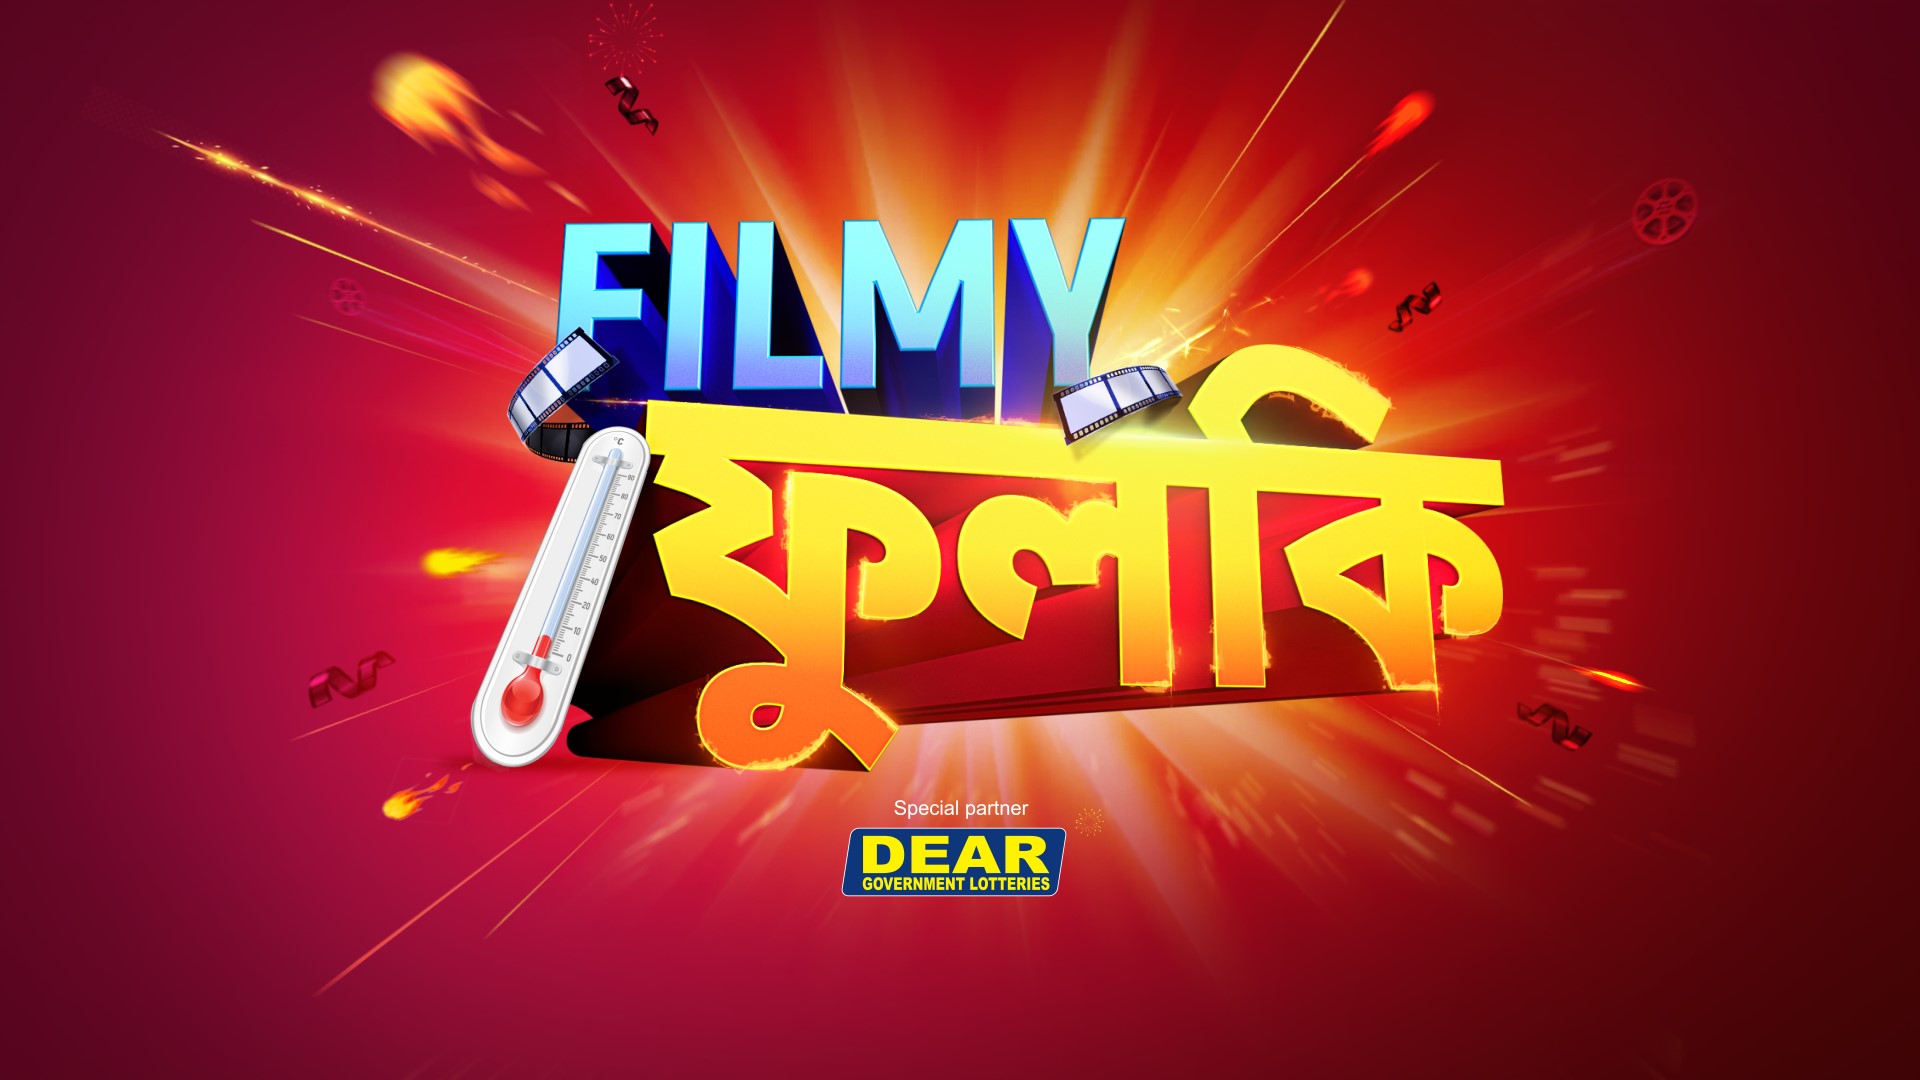 Colors Bangla Cinema presents 'Filmy Fulki' - A blockbuster movie festival to warm up the December chills!